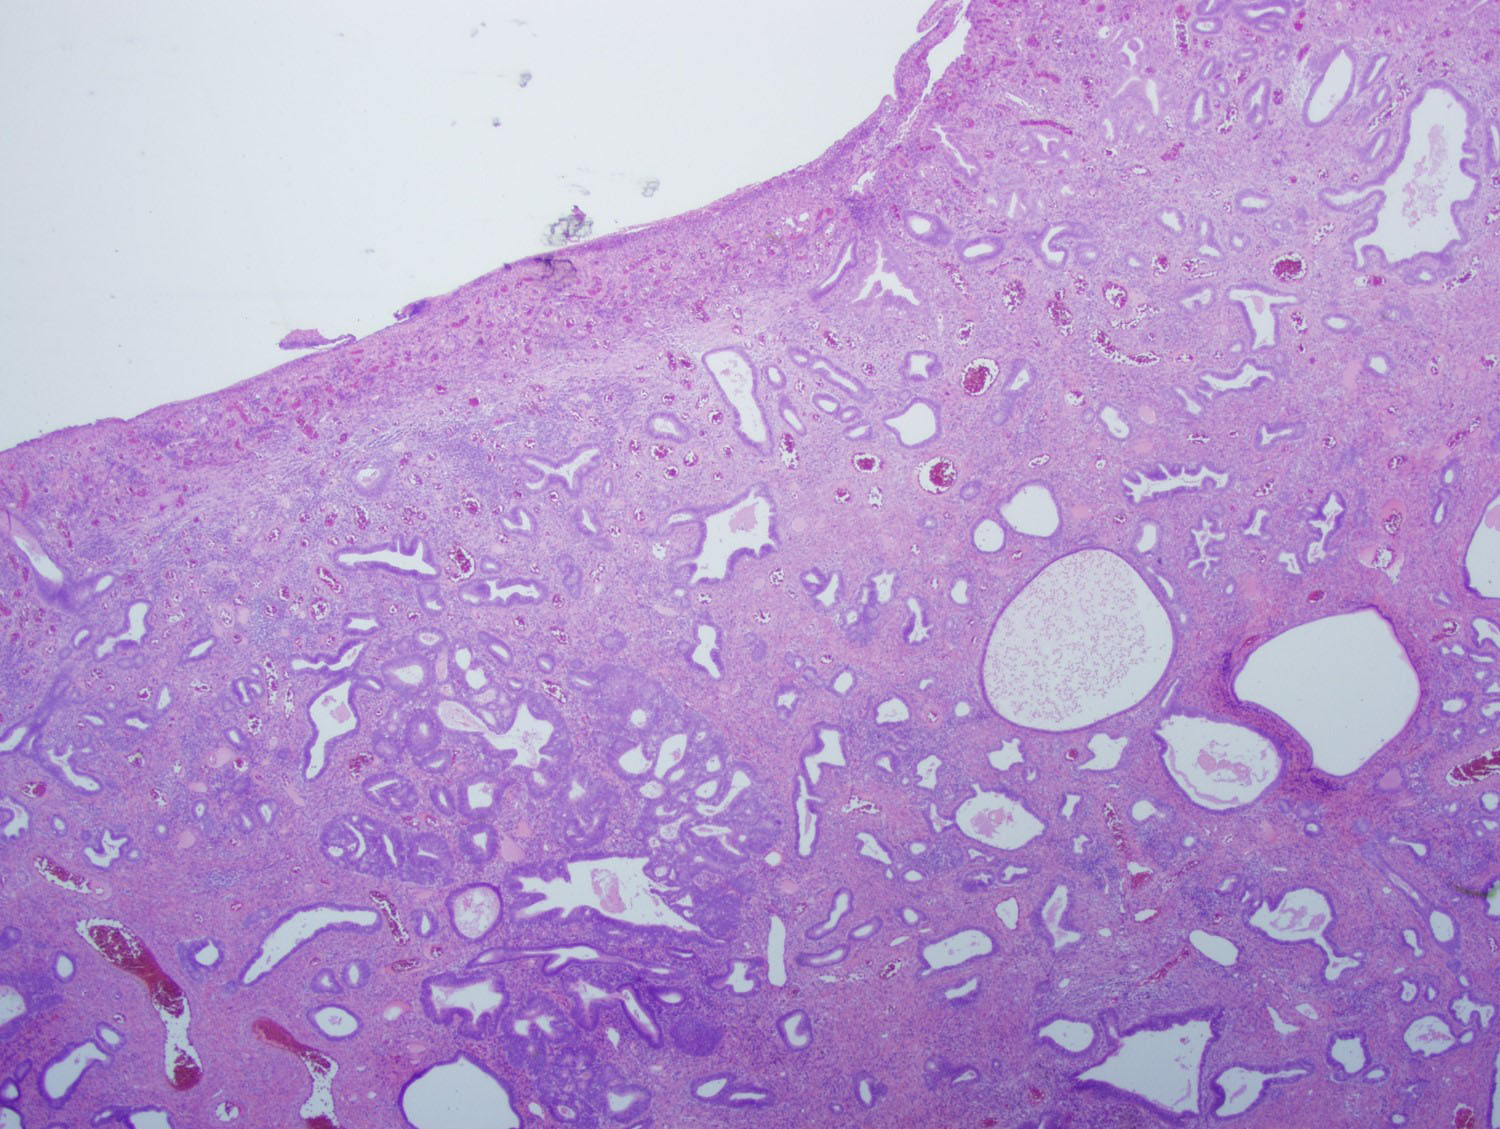 Figure 2 (20x): Surface of the sigmoid polyp showing effacement of normal colonic mucosa by infiltrating glands with cystic dilation and surrounding spindle cell stroma and vascular dilation.